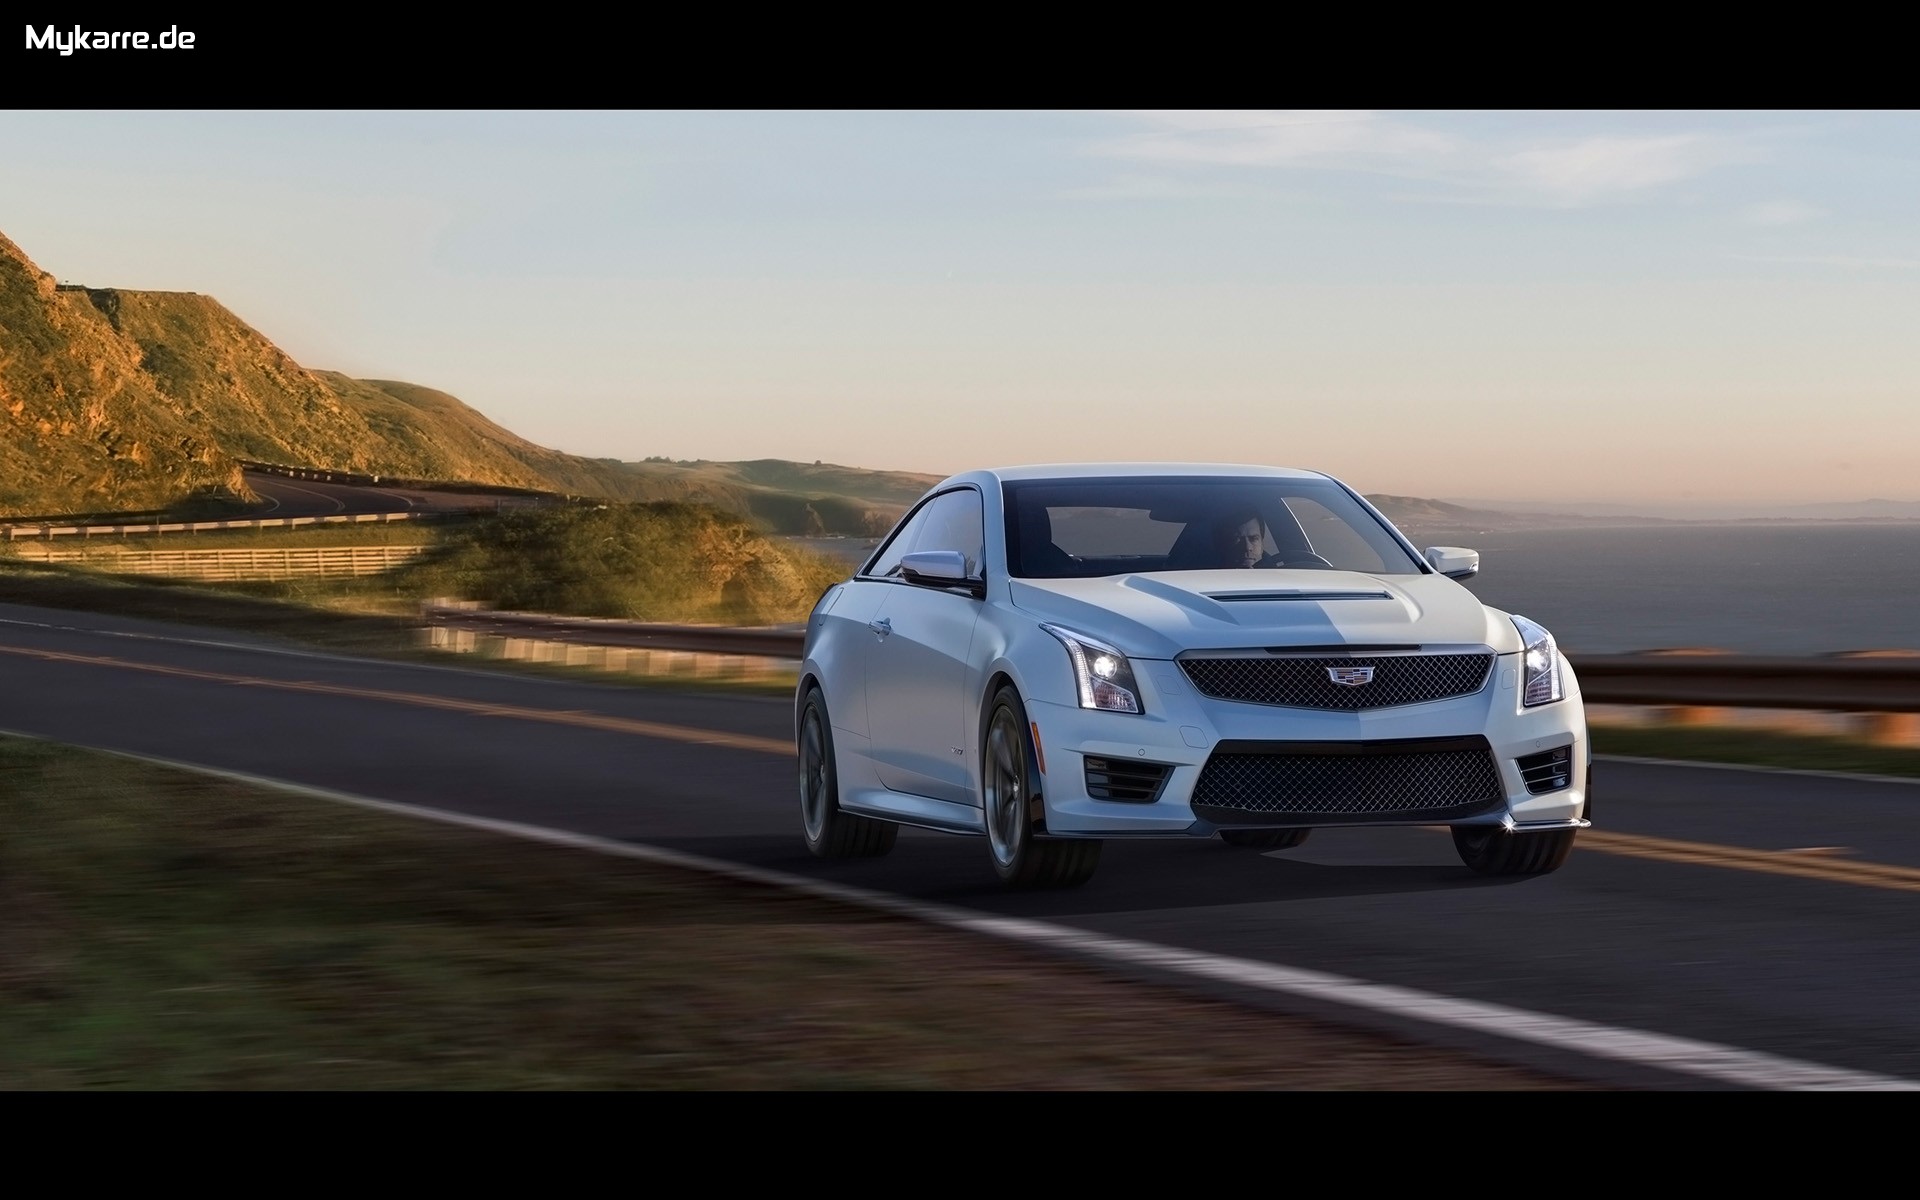 Cadillac Ats V Coupe Frontansicht Wallpaper Auto Tuning News